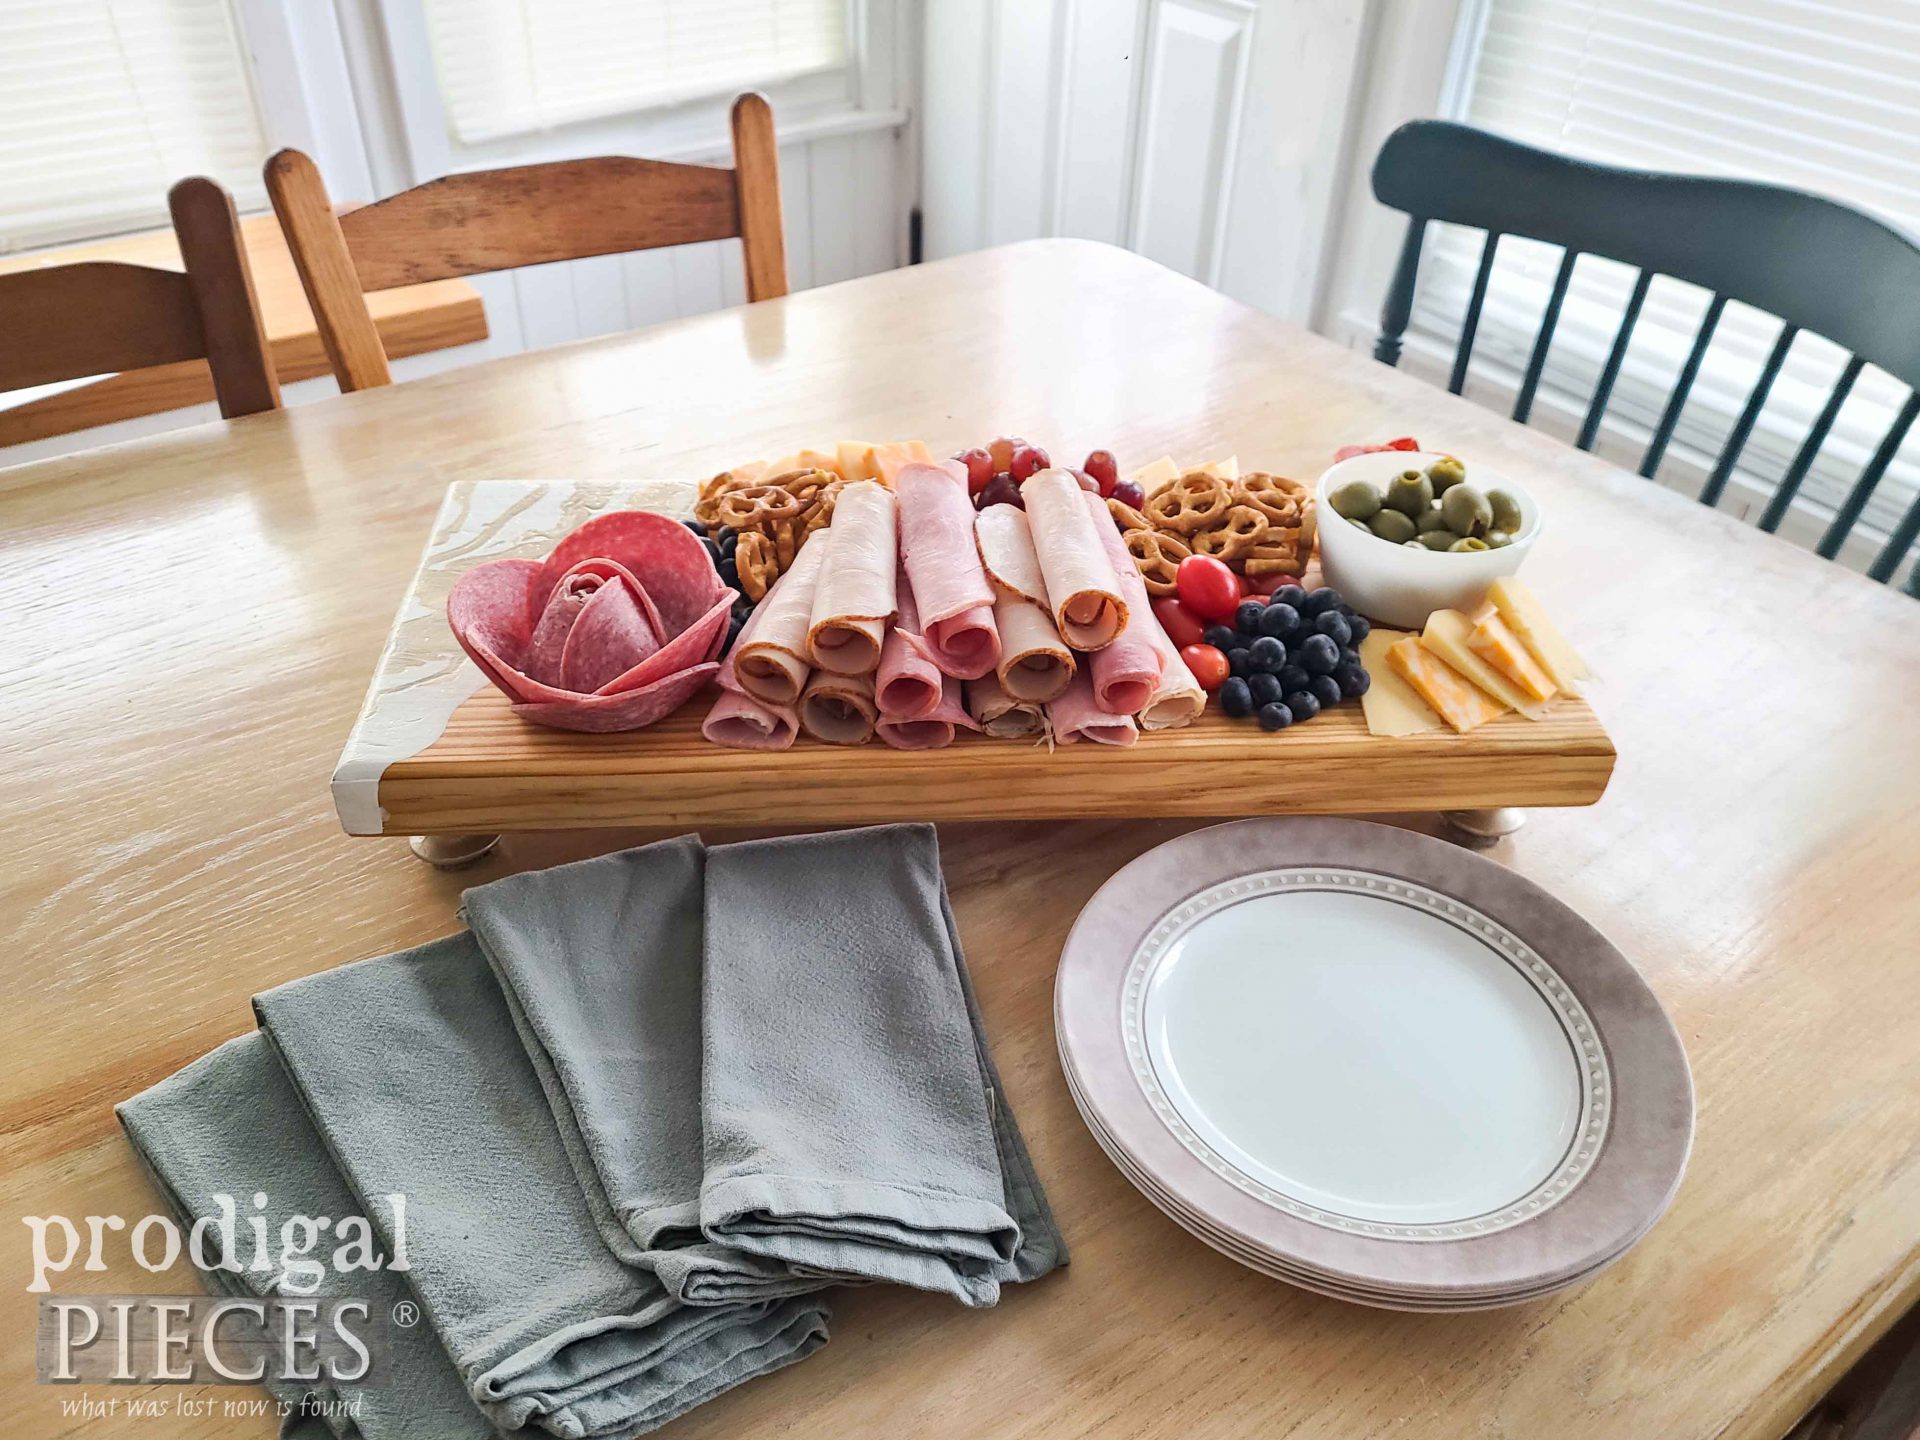 DIY Table Centerpiece Charcuterie Board with all the trimmings by Larissa of Prodigal Pieces | prodigalpieces.com #prodigalpieces #centerpiece #diy #food